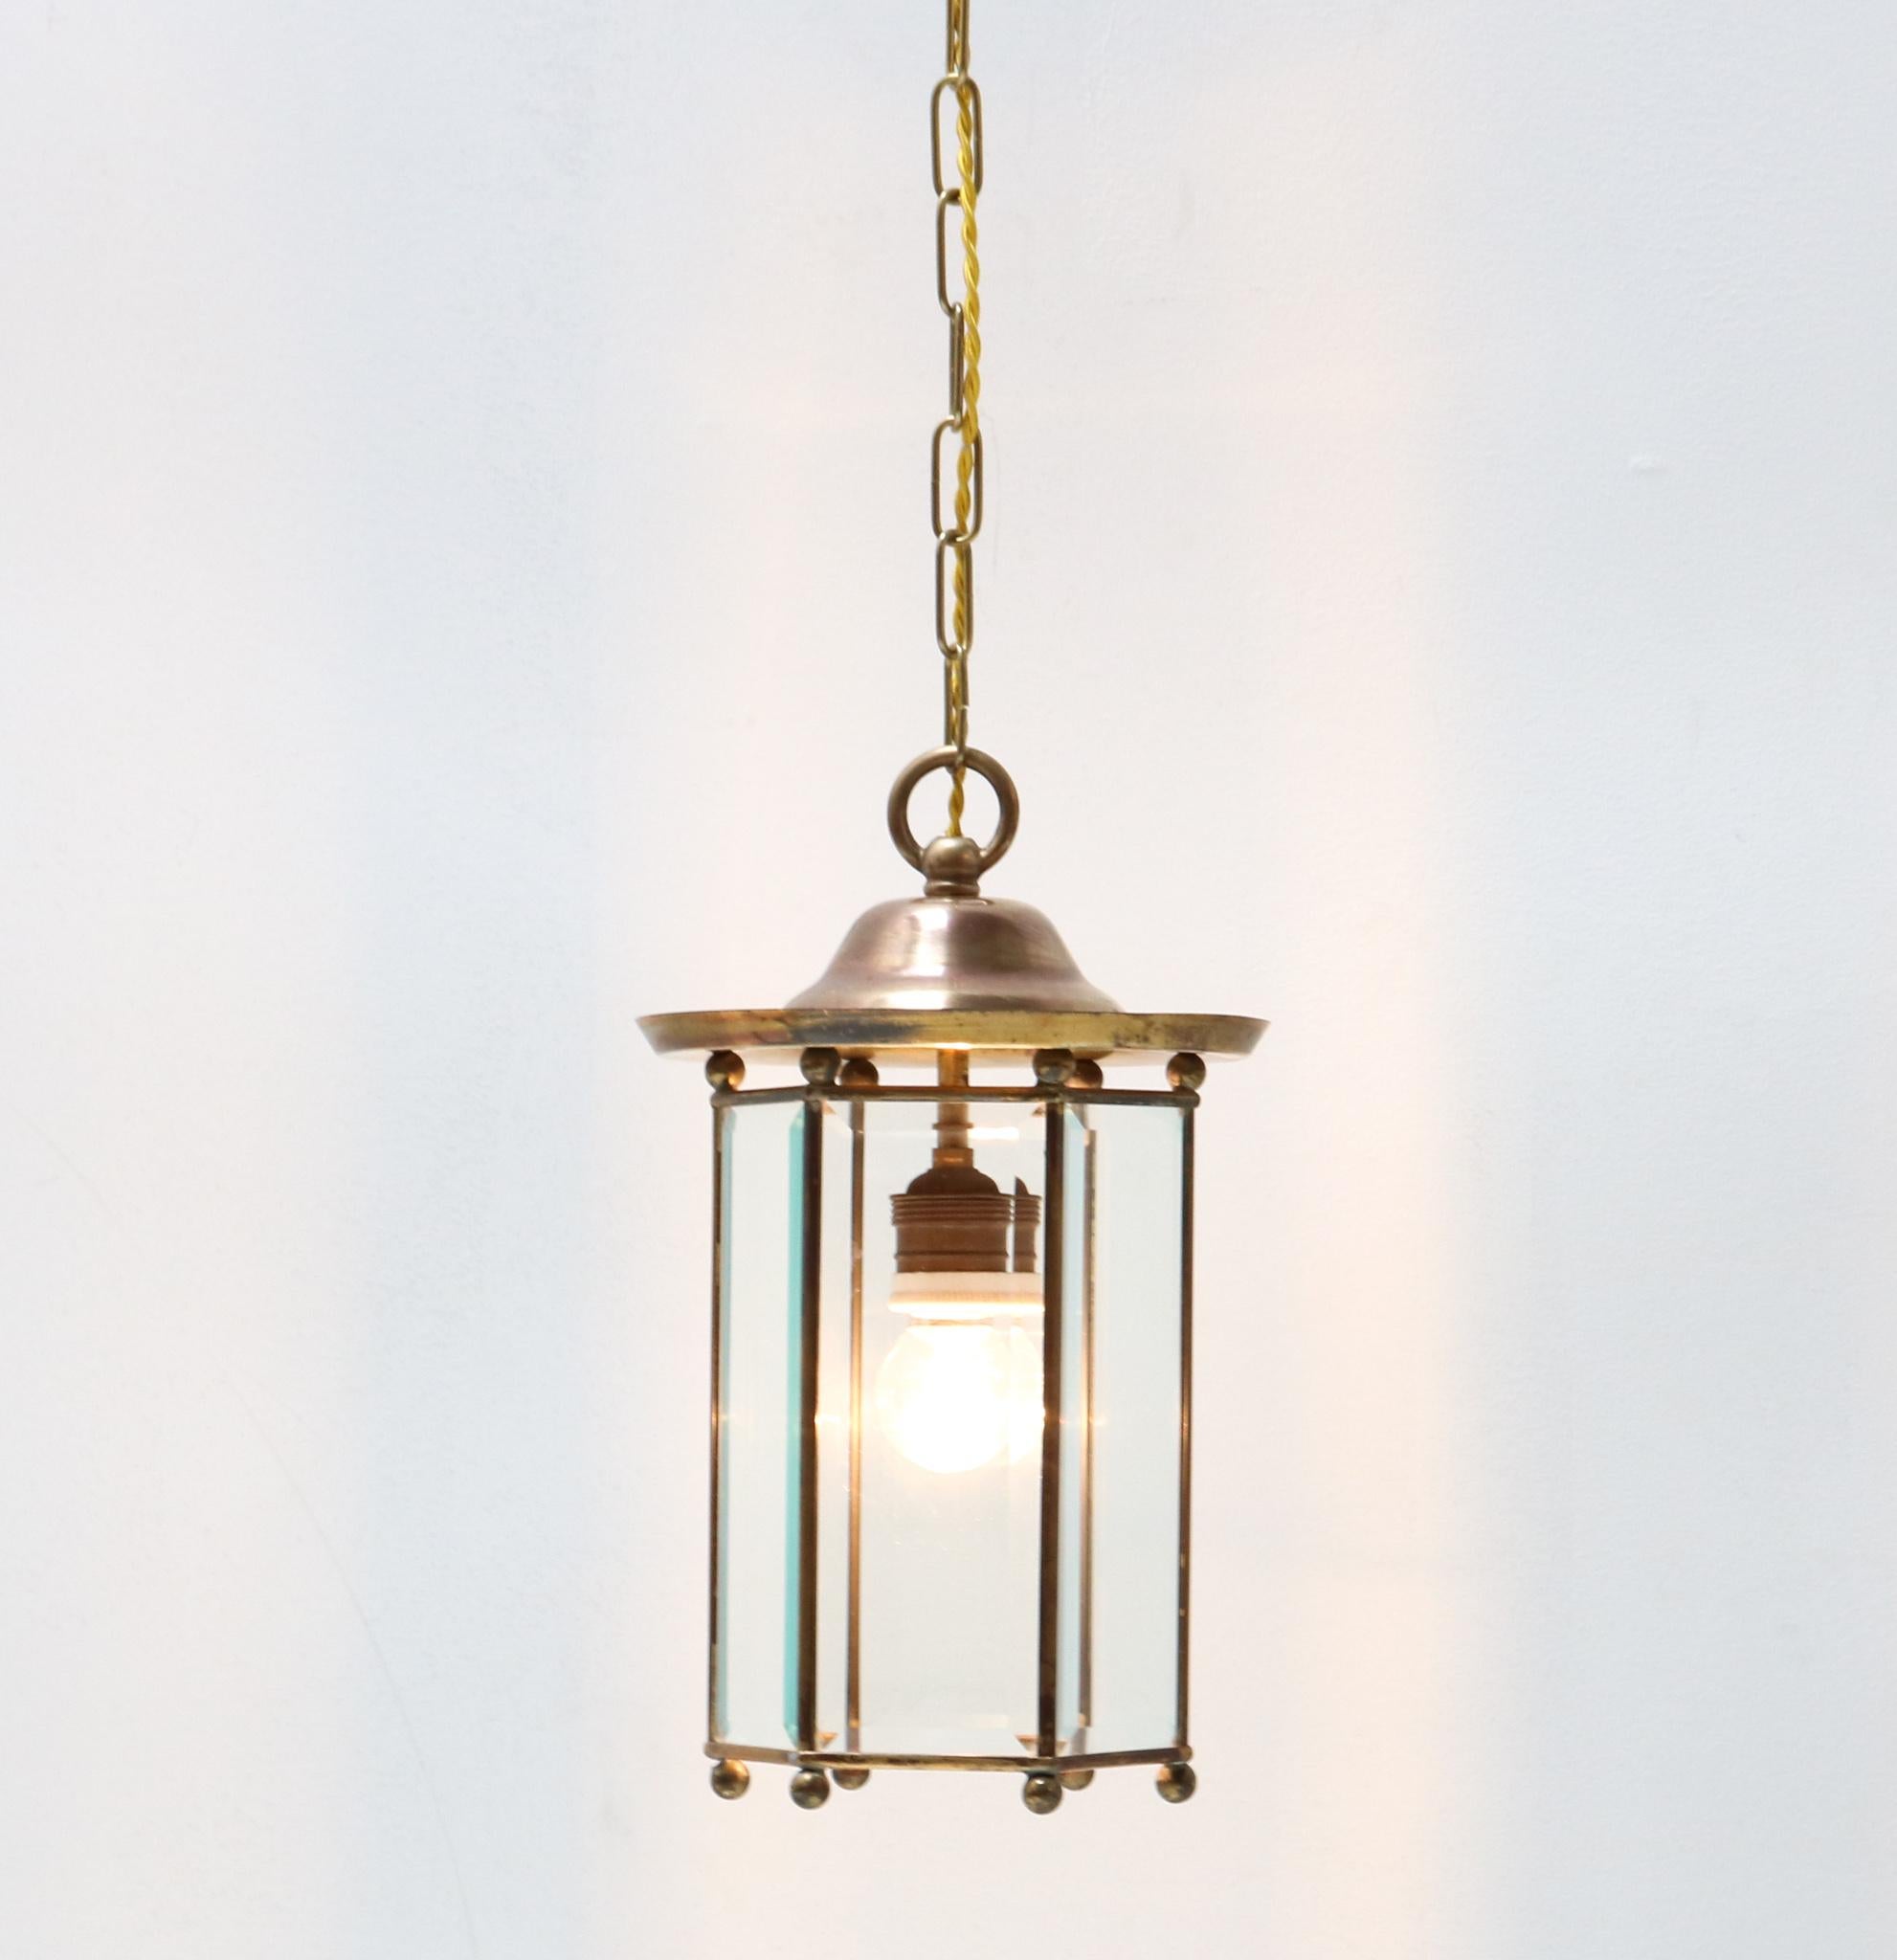 Stunning Art Nouveau lantern.
Striking Dutch design from the 1900s.
Brass frame with original glass.
Rewired with one socket for E-27 light bulb.
In very good condition with a beautiful patina.